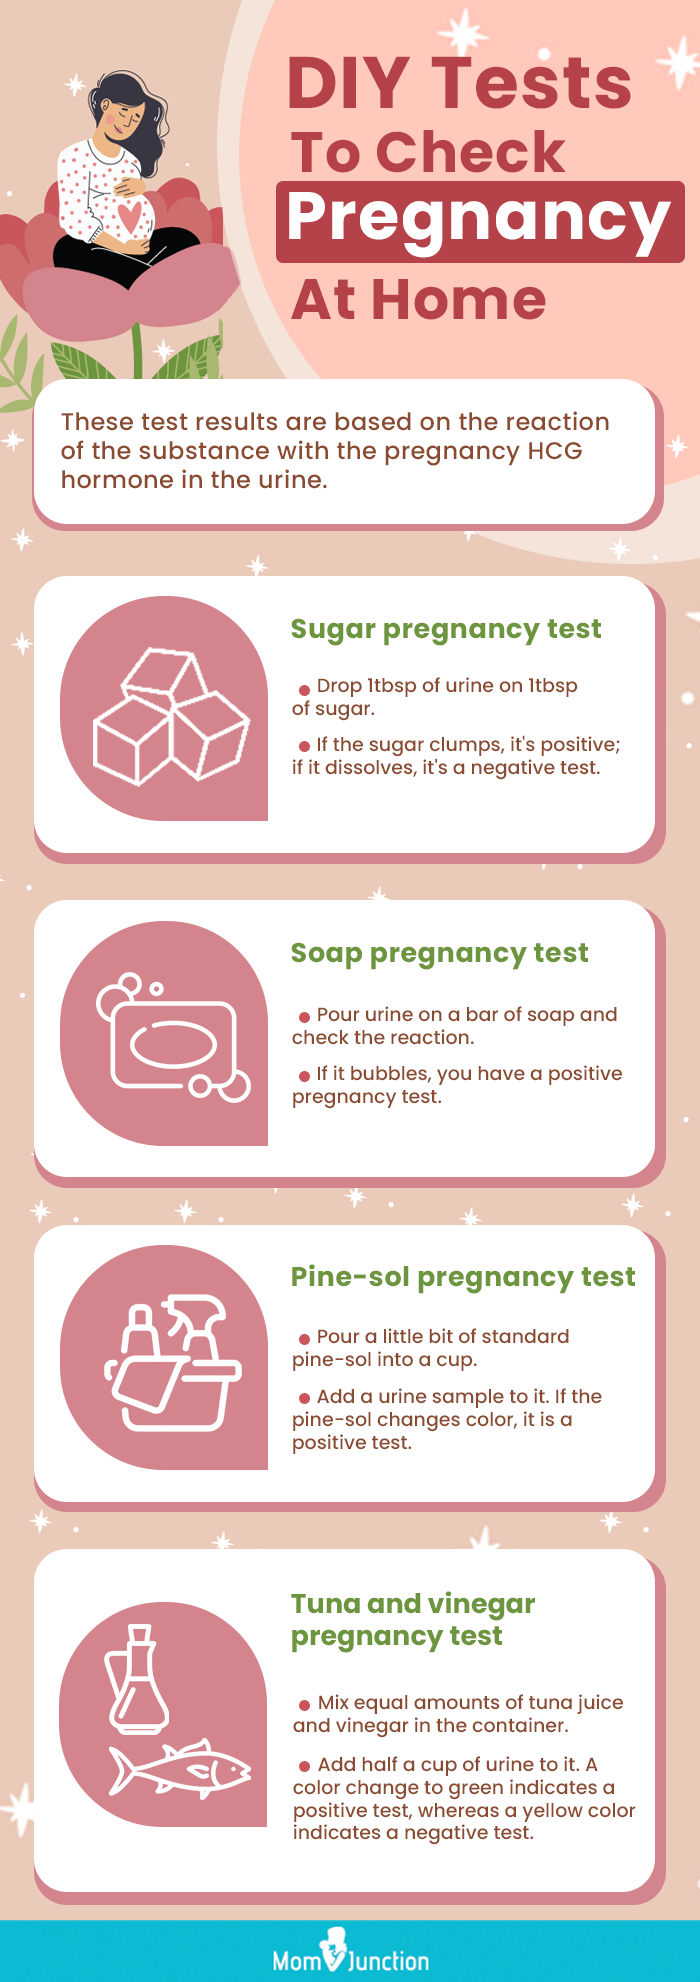 11 Simple Homemade (DIY) Pregnancy Tests Do They Work? photo